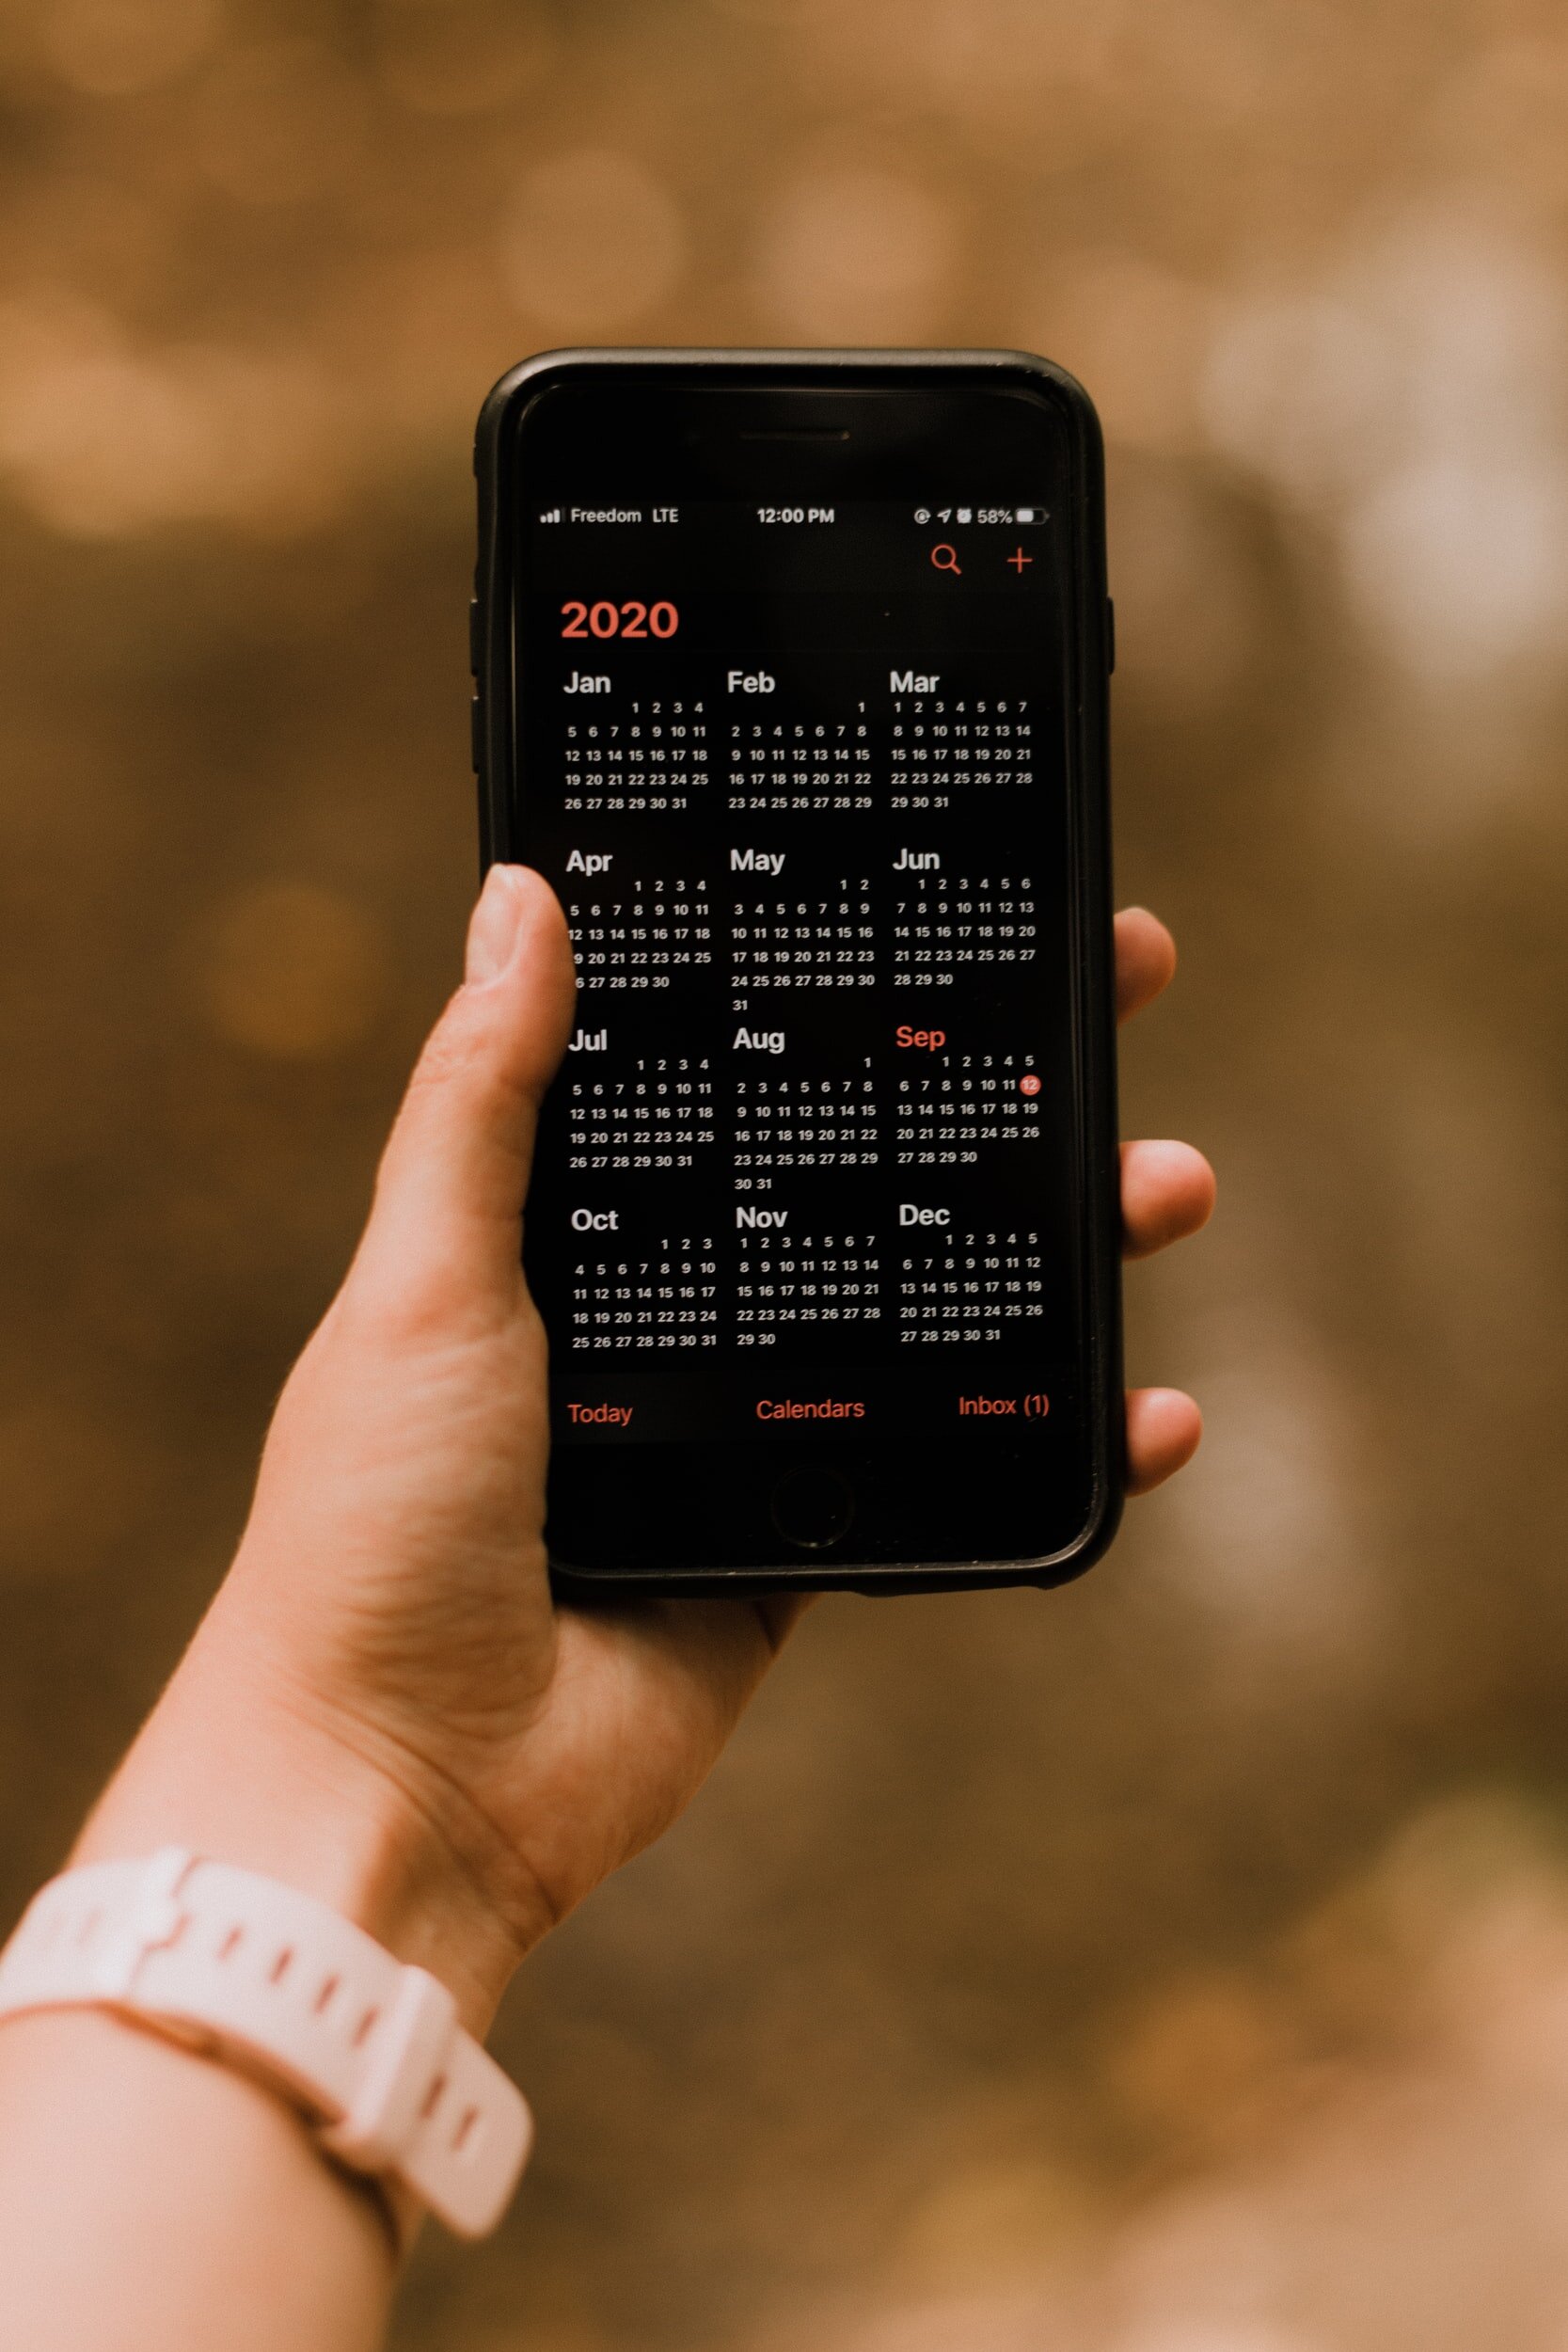 Photo by Priscilla Du Preez on Unsplash A person checks their iPhone calendar to keep track of their fuller packed schedule.